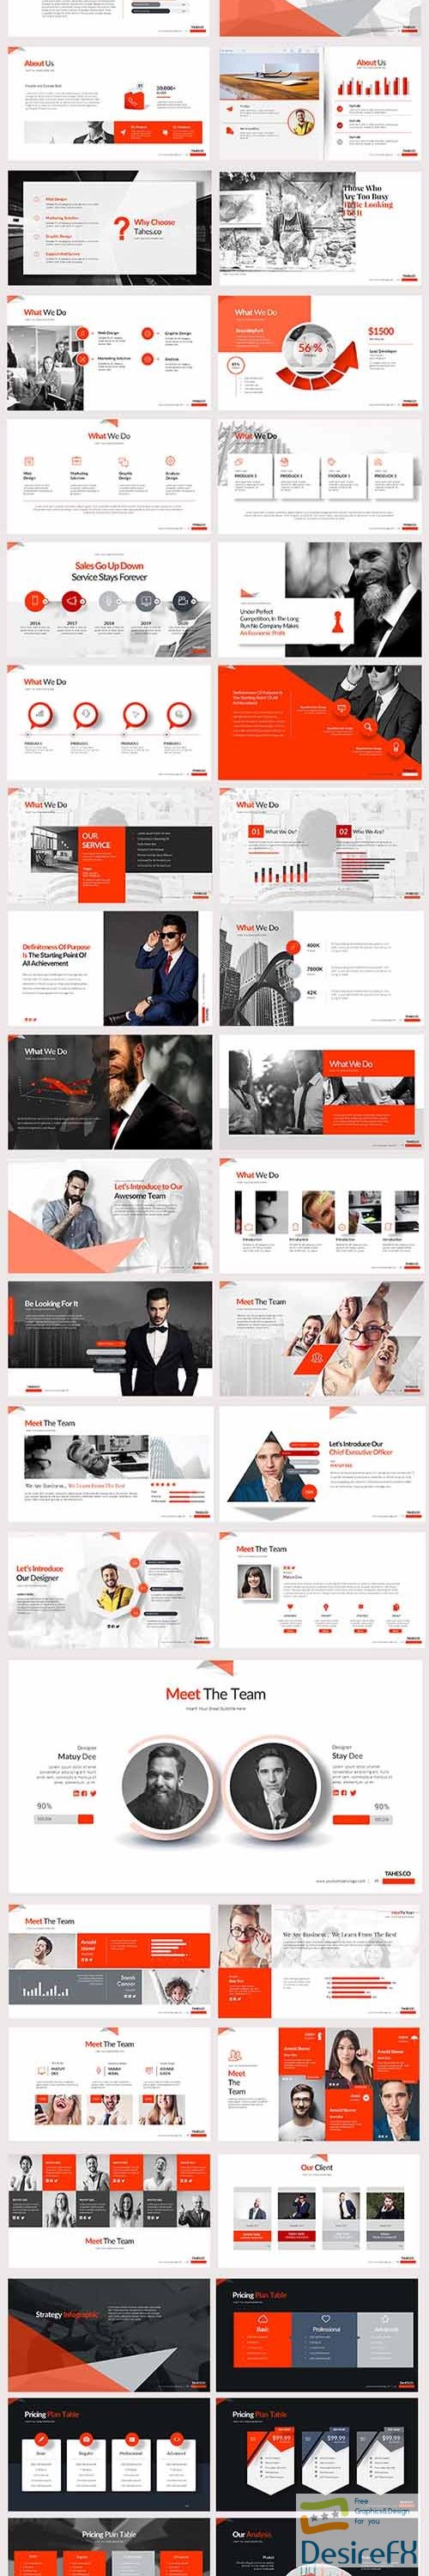 GR - Tahes.Co PowerPoint Template 21345569